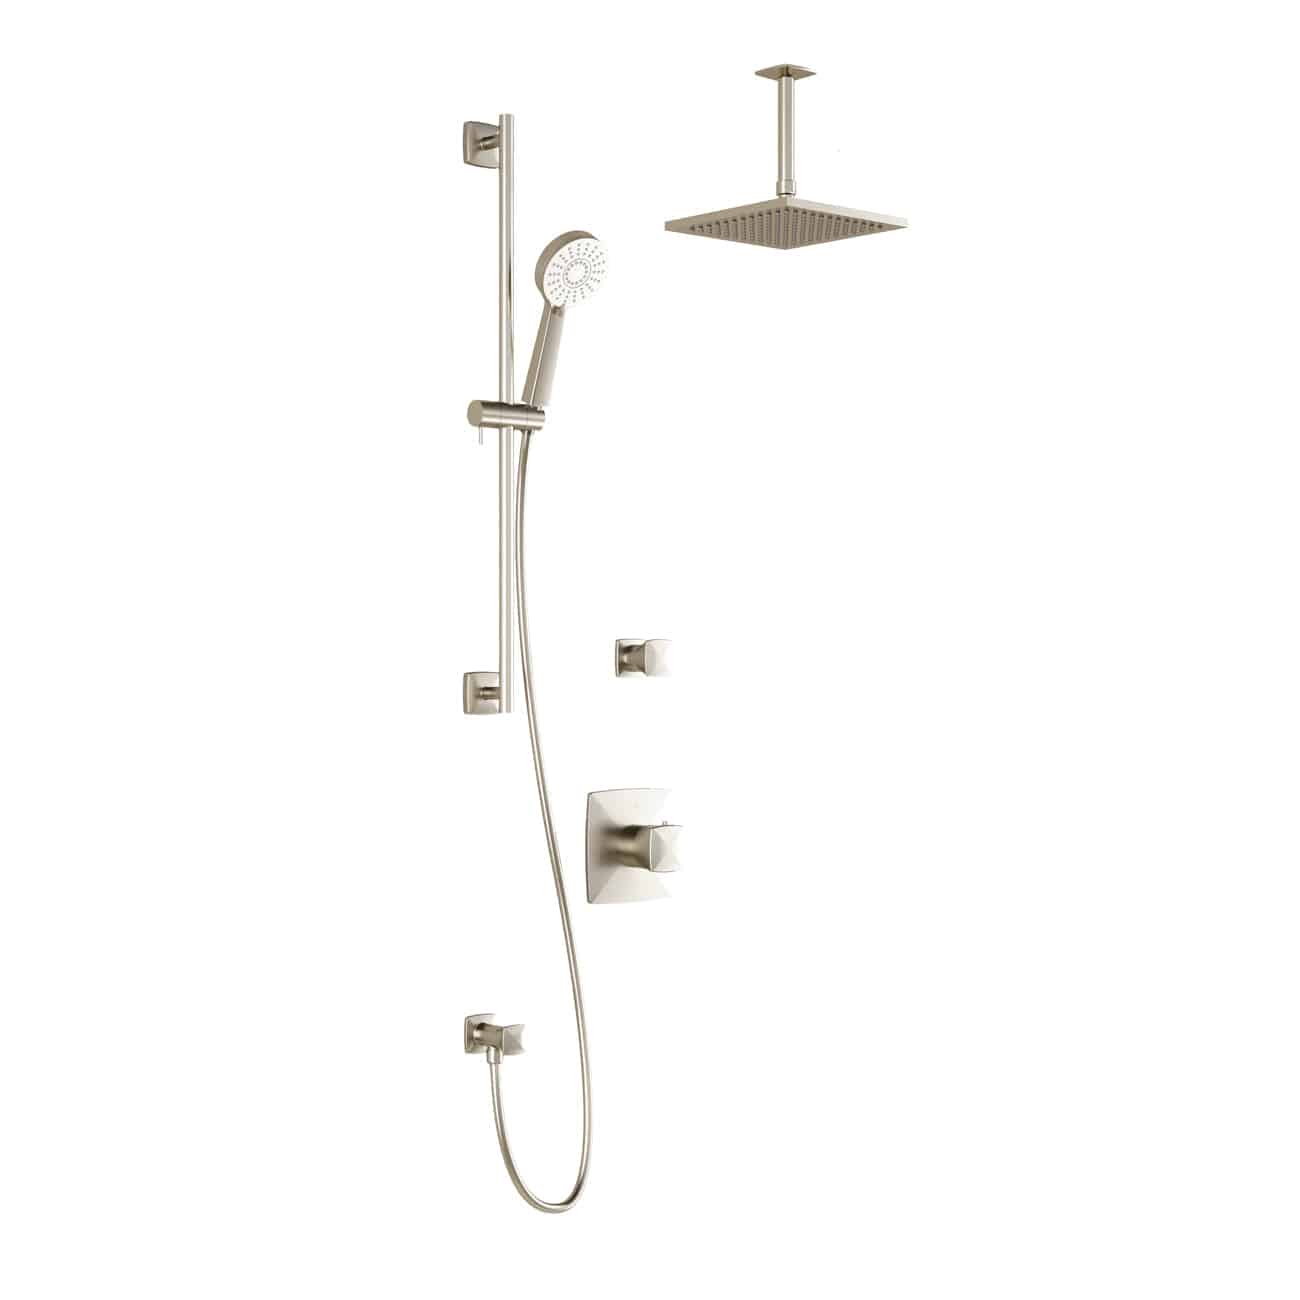 Kalia UMANI T2 (Valves Not Included) AQUATONIK T/P Shower Kit System with Vertical Ceiling Arm and 8" Square Rain Shower Head- Brushed Nickel PVD